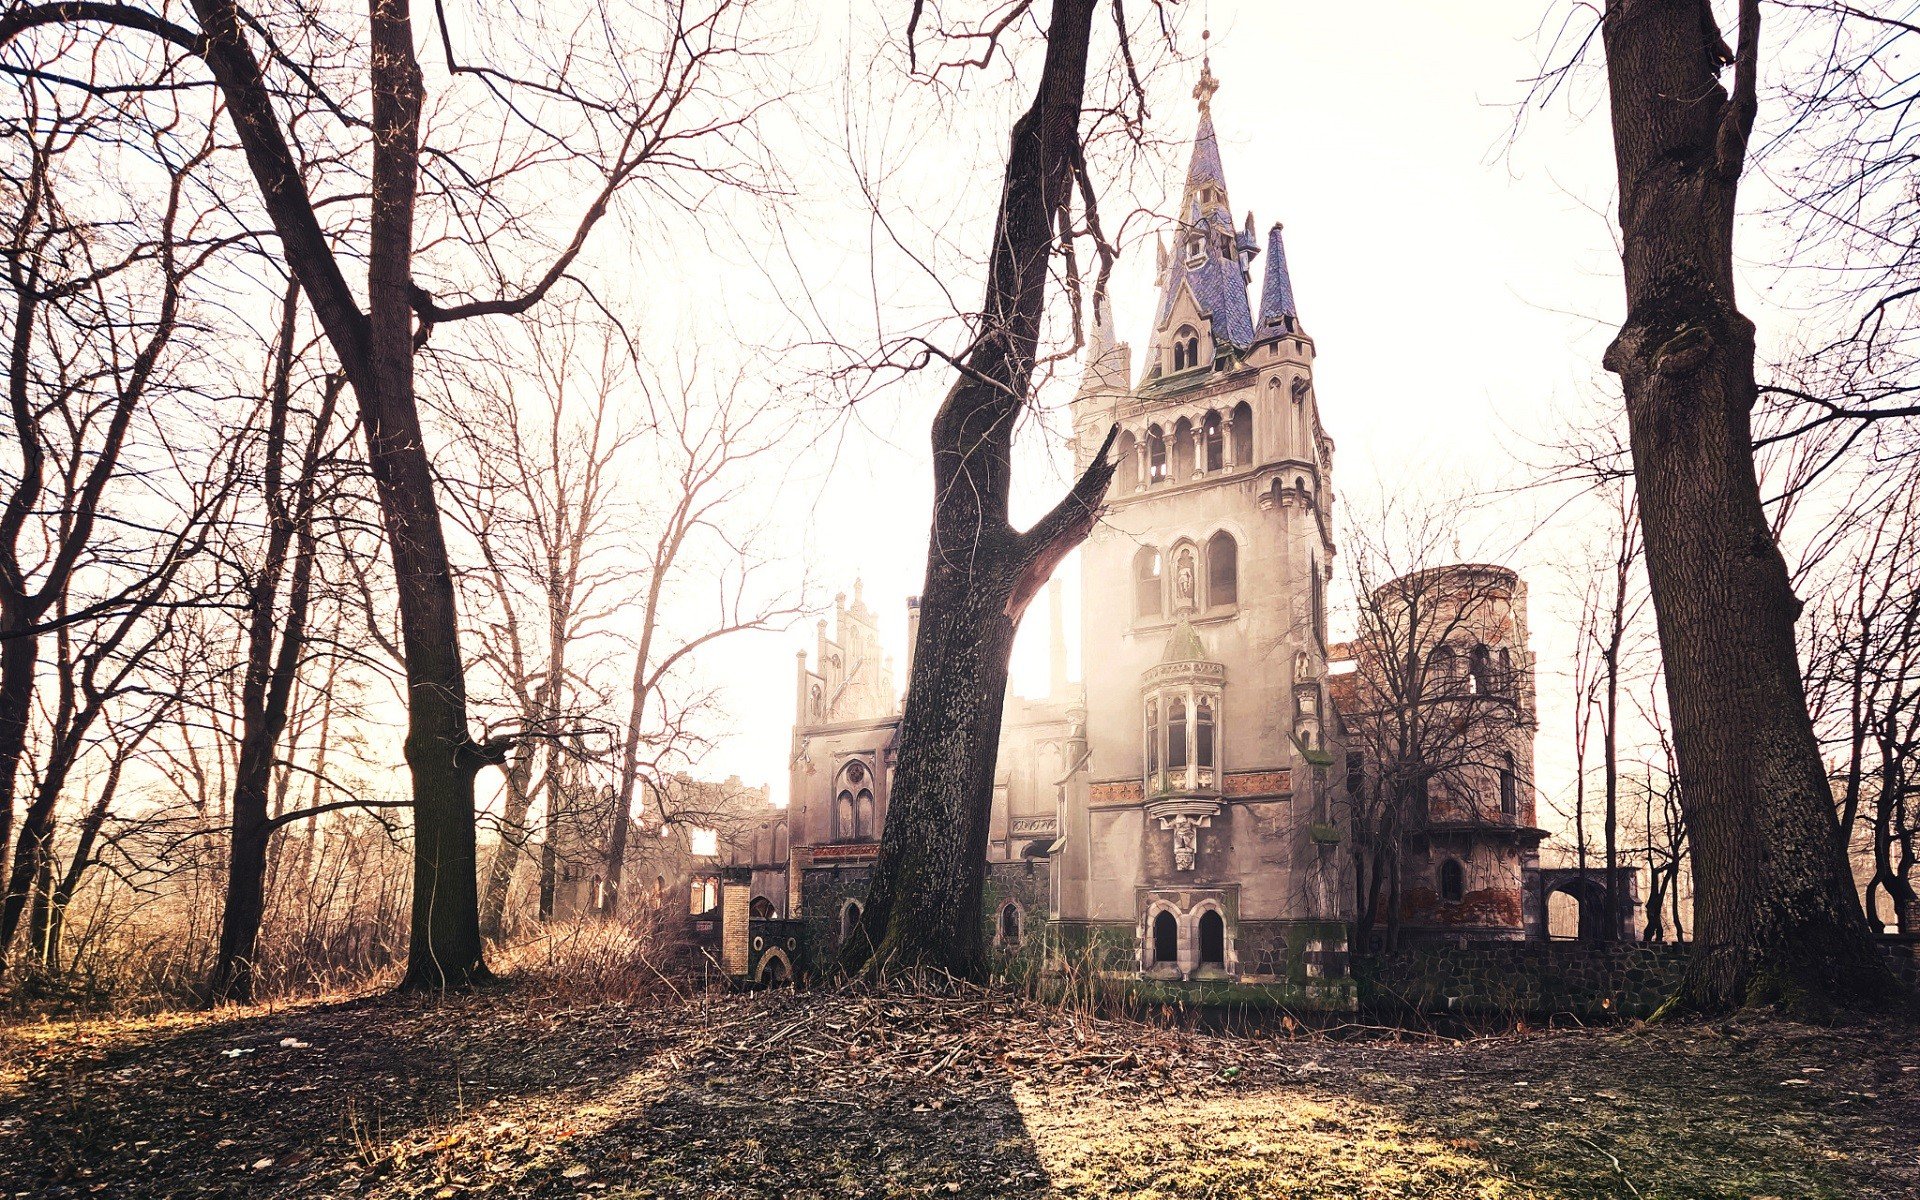 old, Old building, Architecture, Trees, Gothic architecture, Abandoned Wallpaper